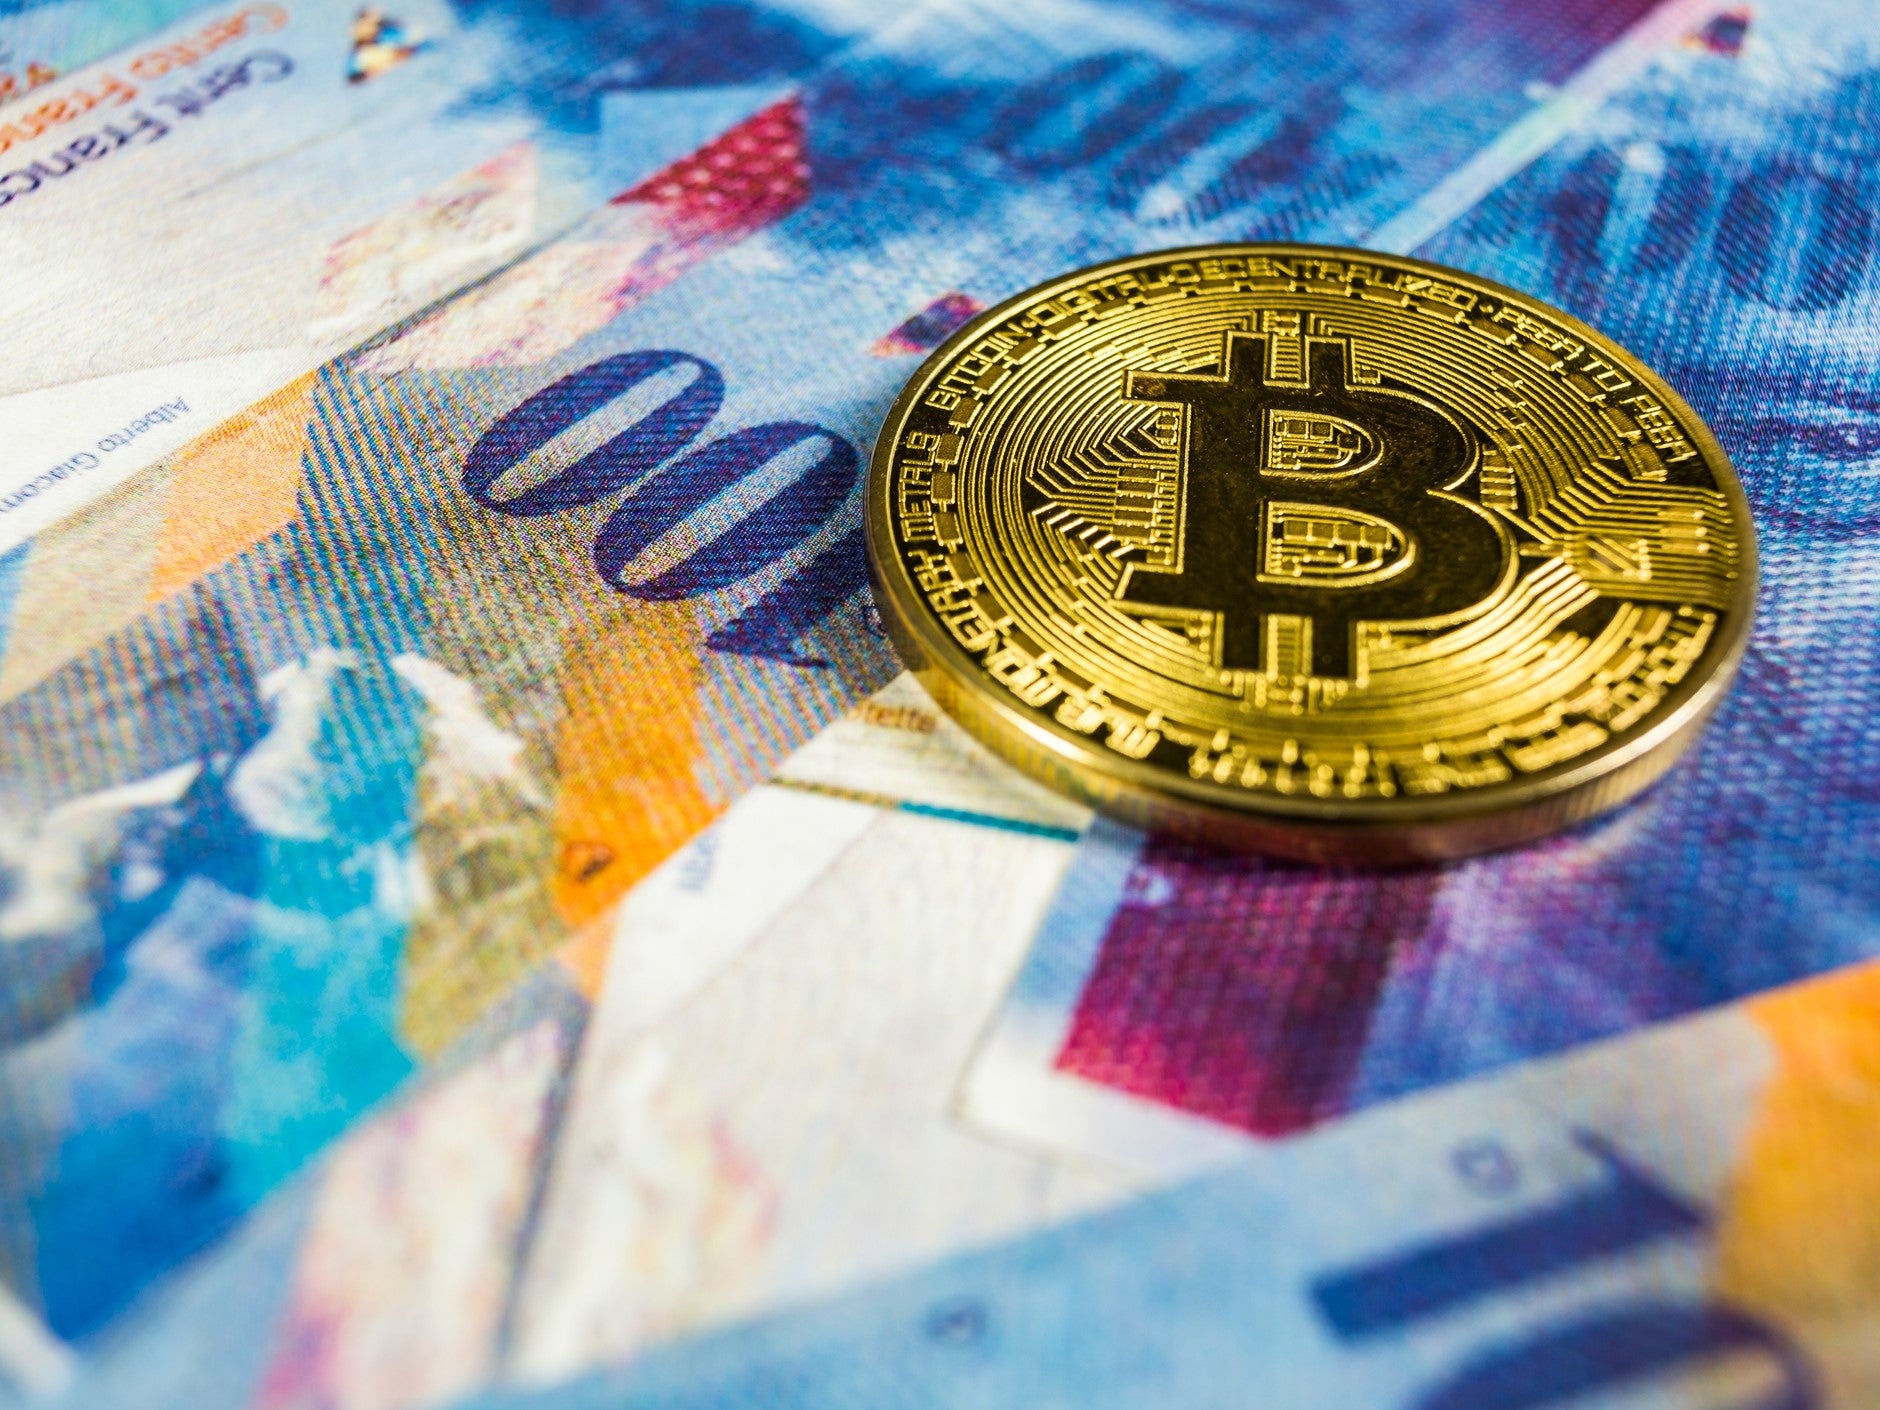 Bitcoin will be legal tender in Lugano alongside the Swiss Franc